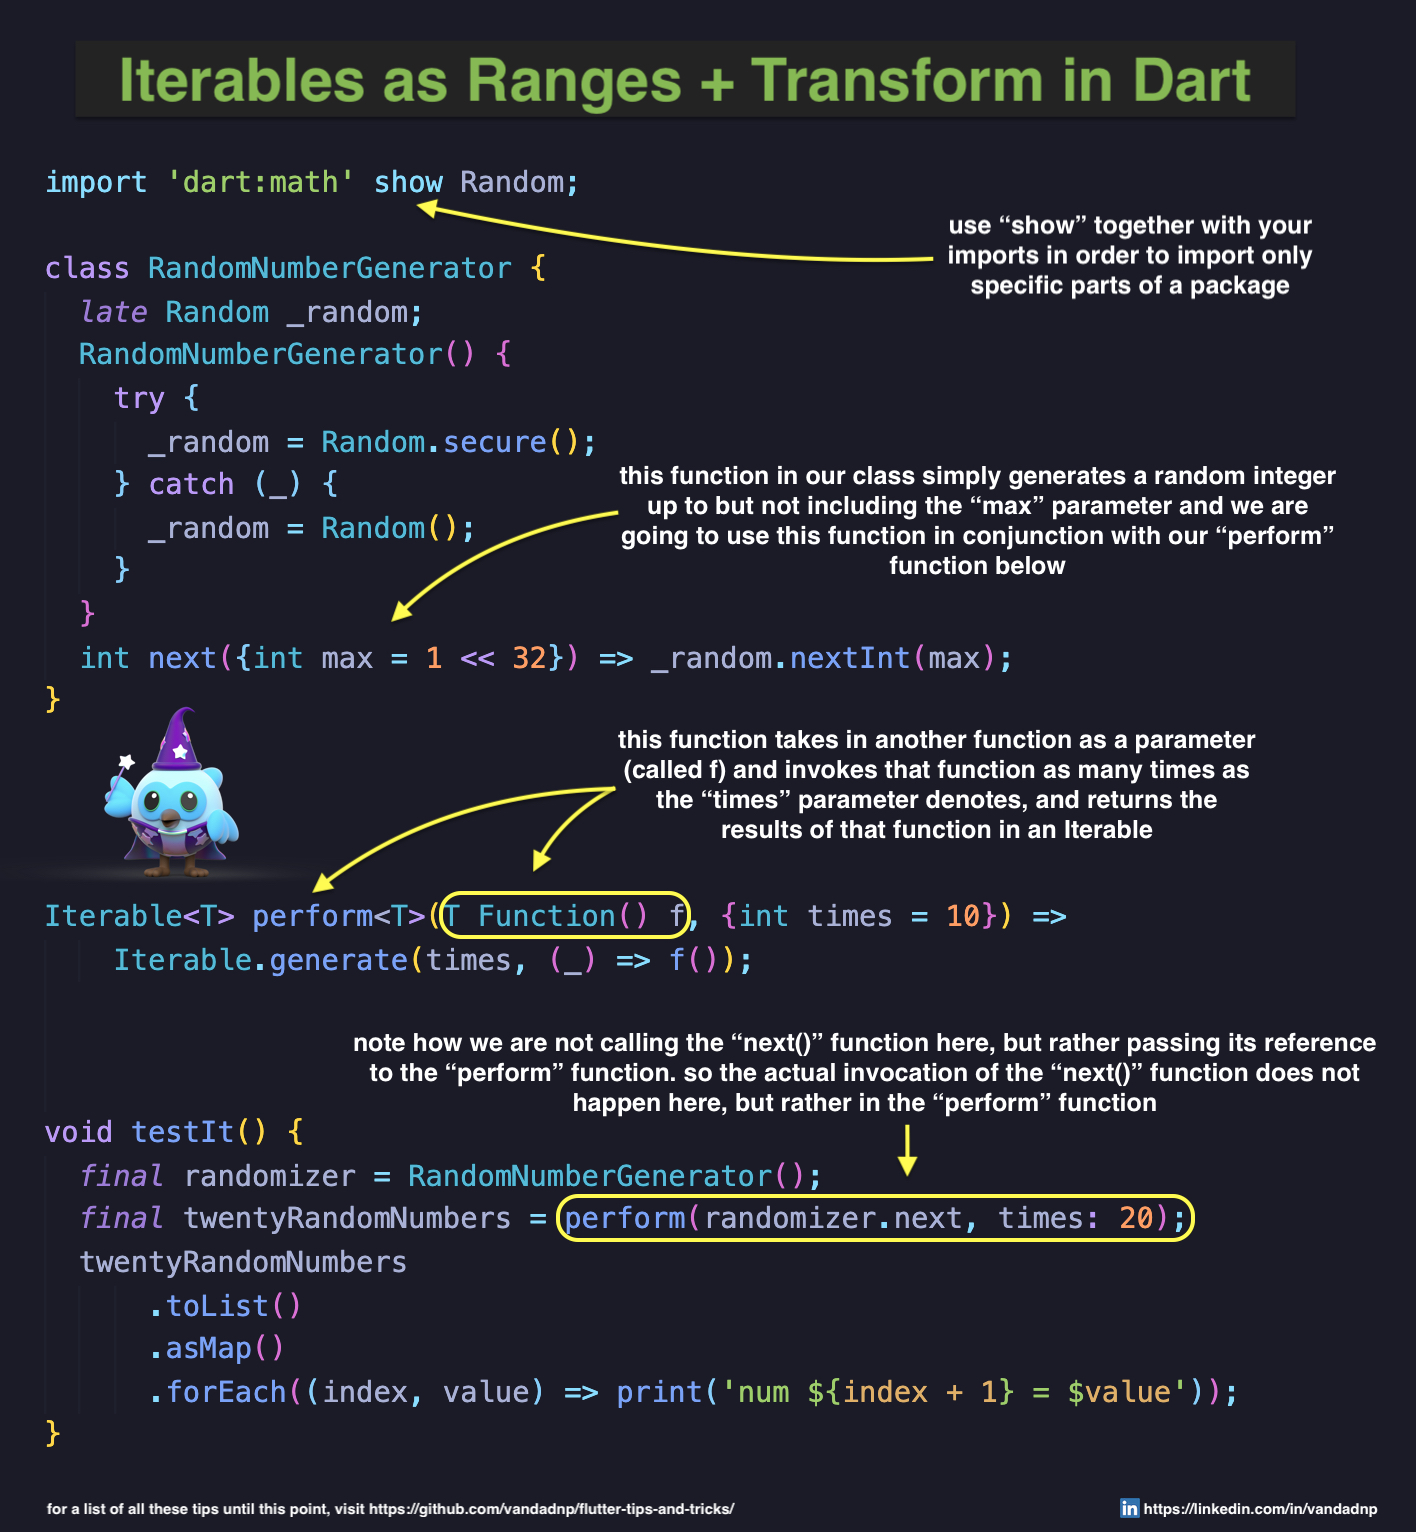 iterables-as-ranges-and-transform-in-dart.jpg